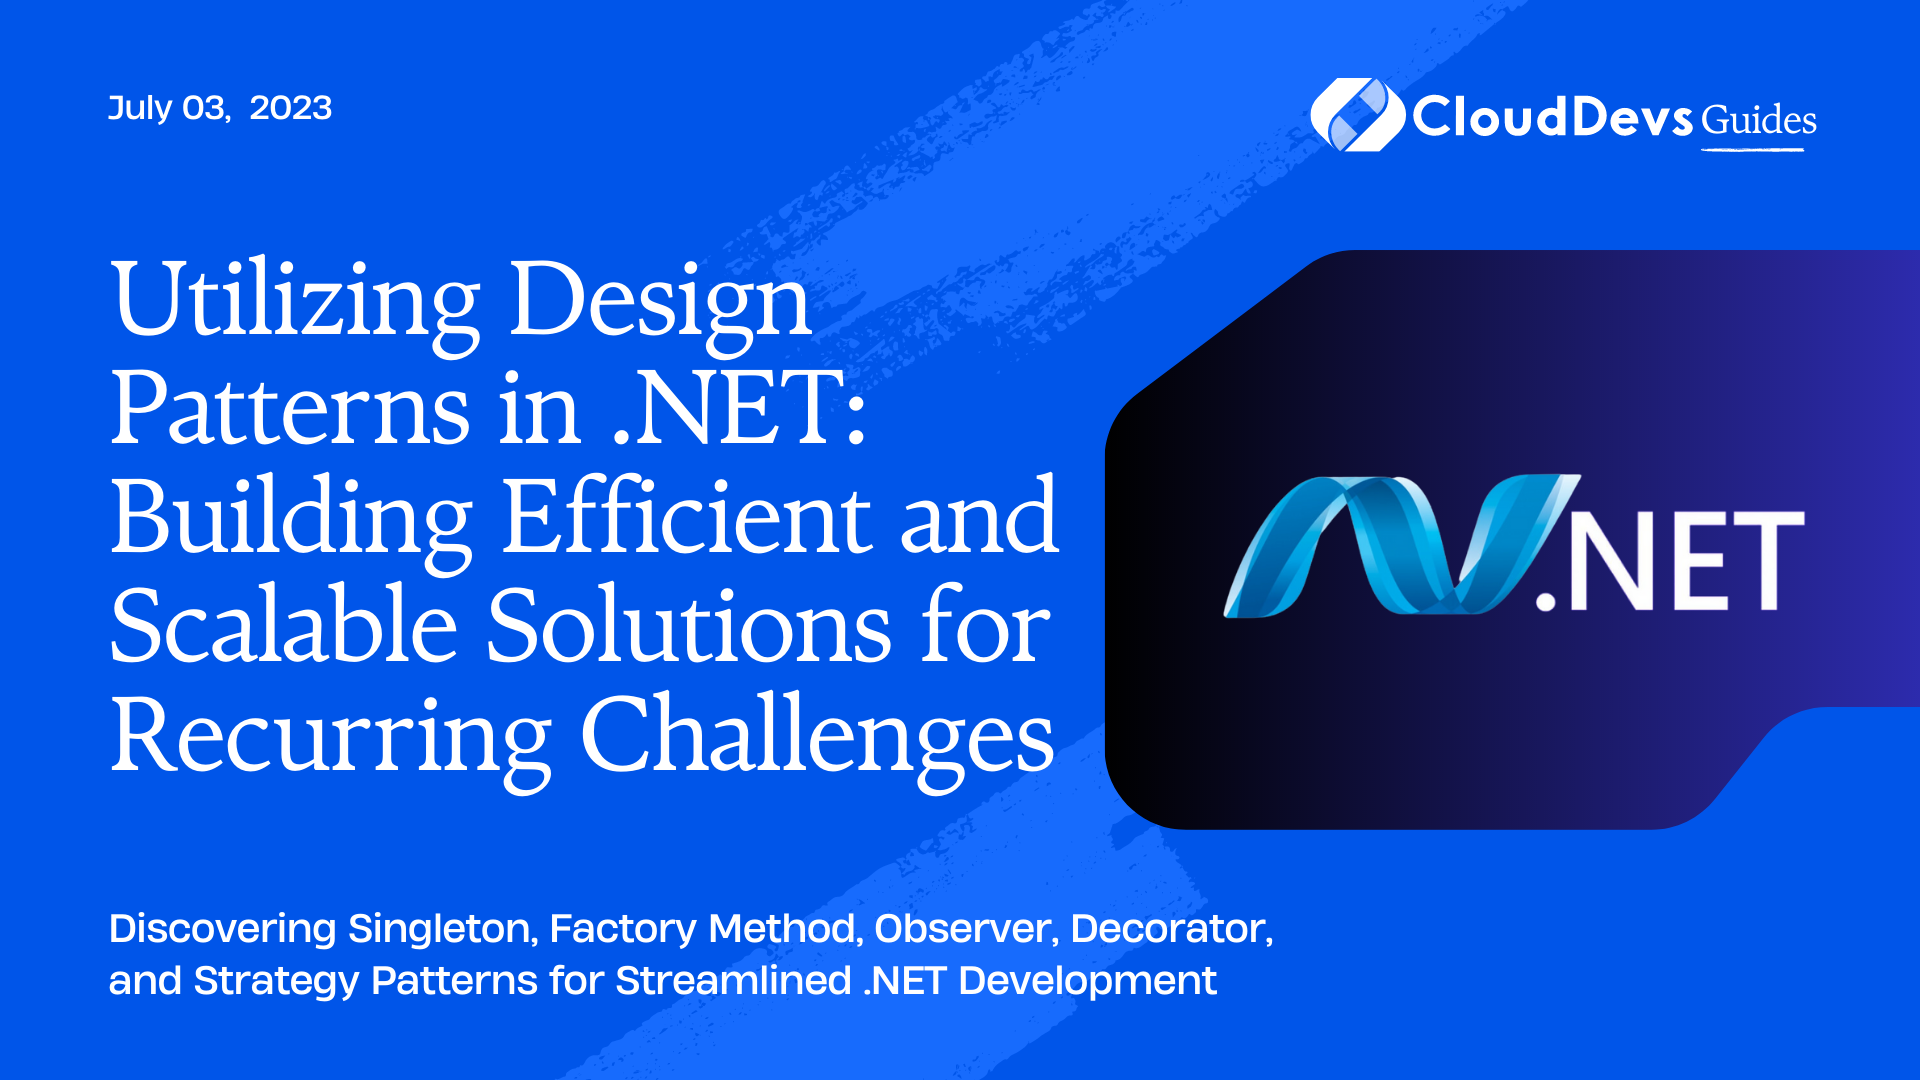 Utilizing Design Patterns in .NET: Building Efficient and Scalable Solutions for Recurring Challenges